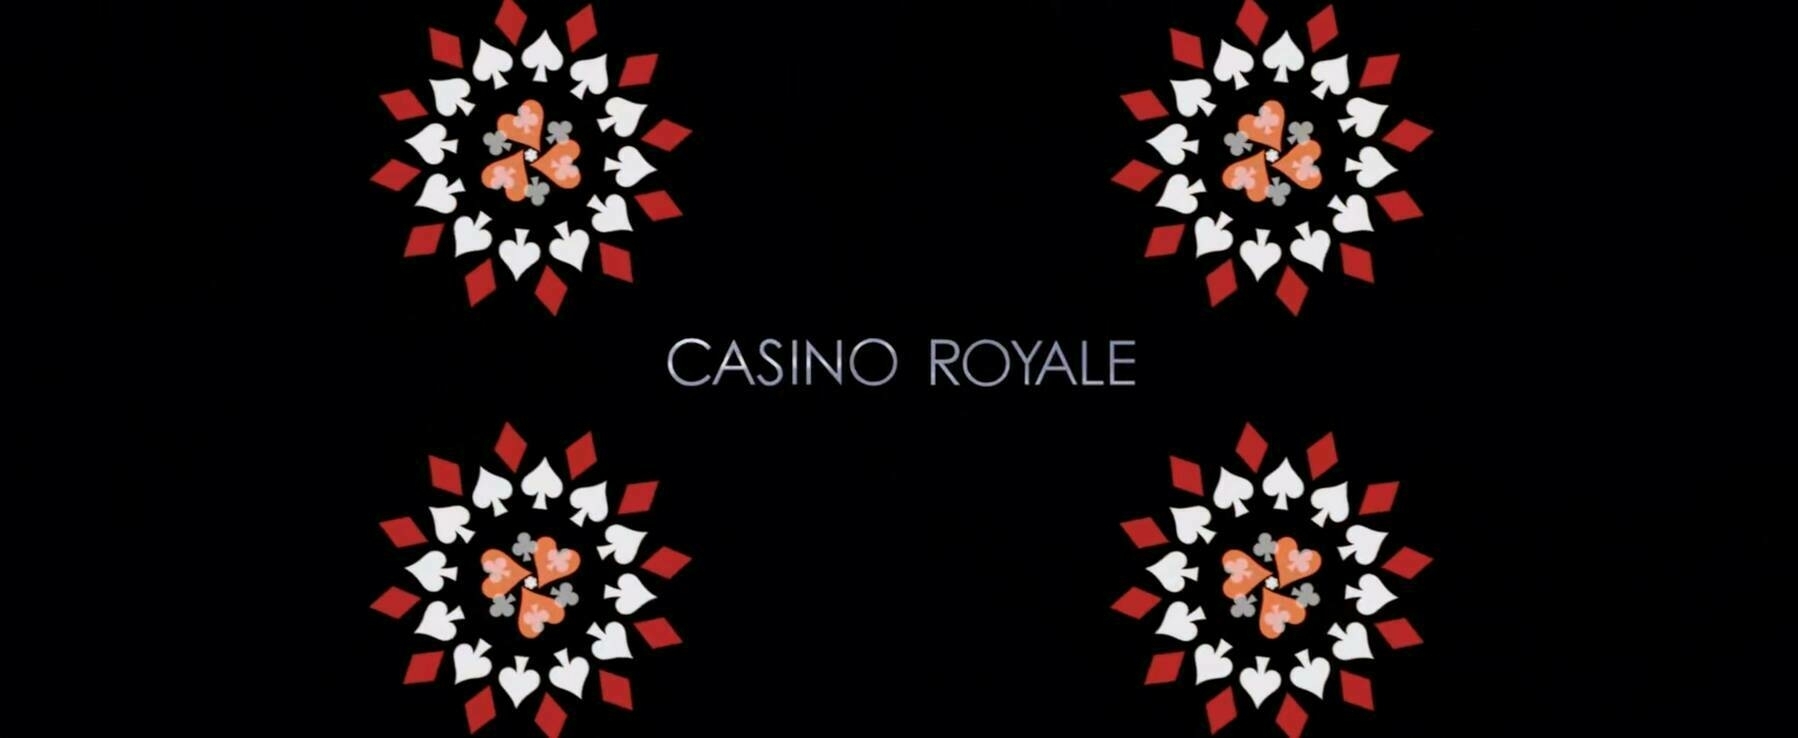 The title card for the film, Casino Royale.